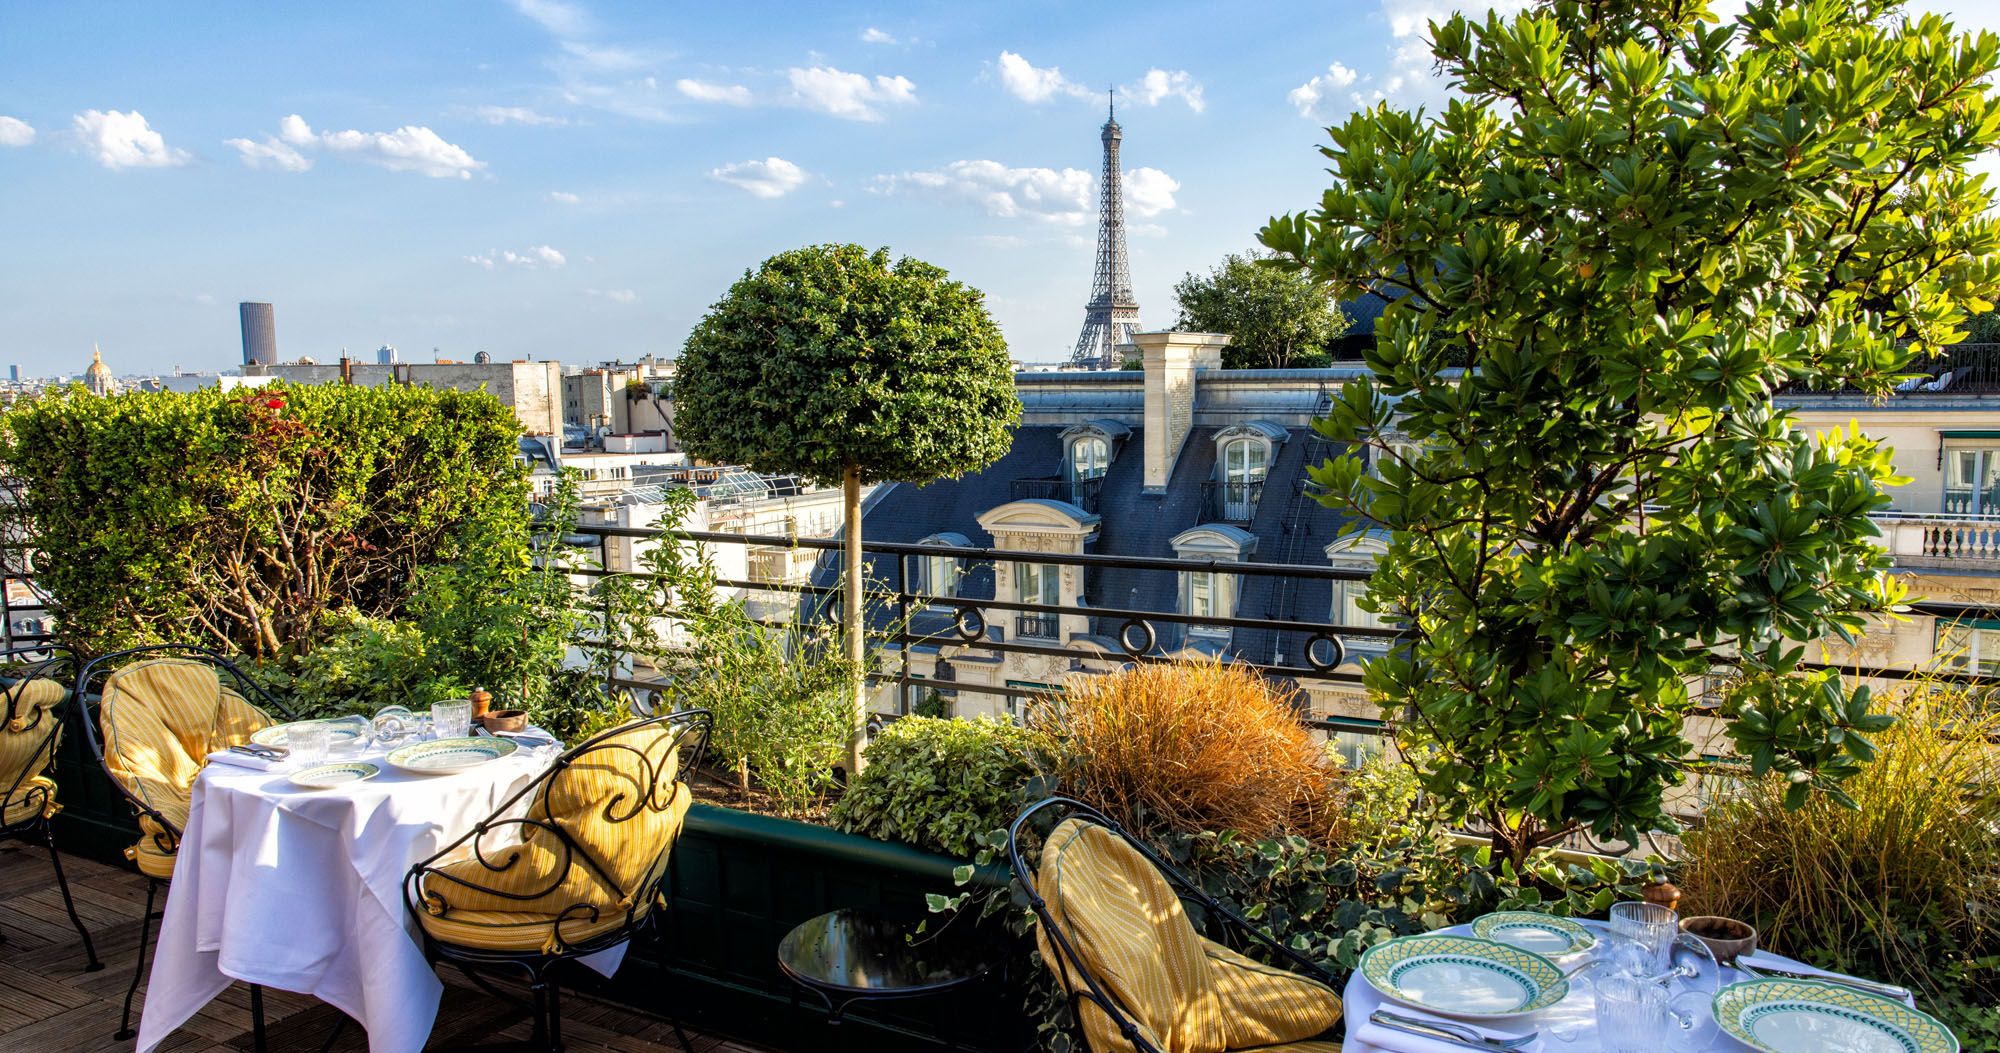 Featured image for “Rooftop Bars & Restaurants in Paris: Where to Dine with a View”